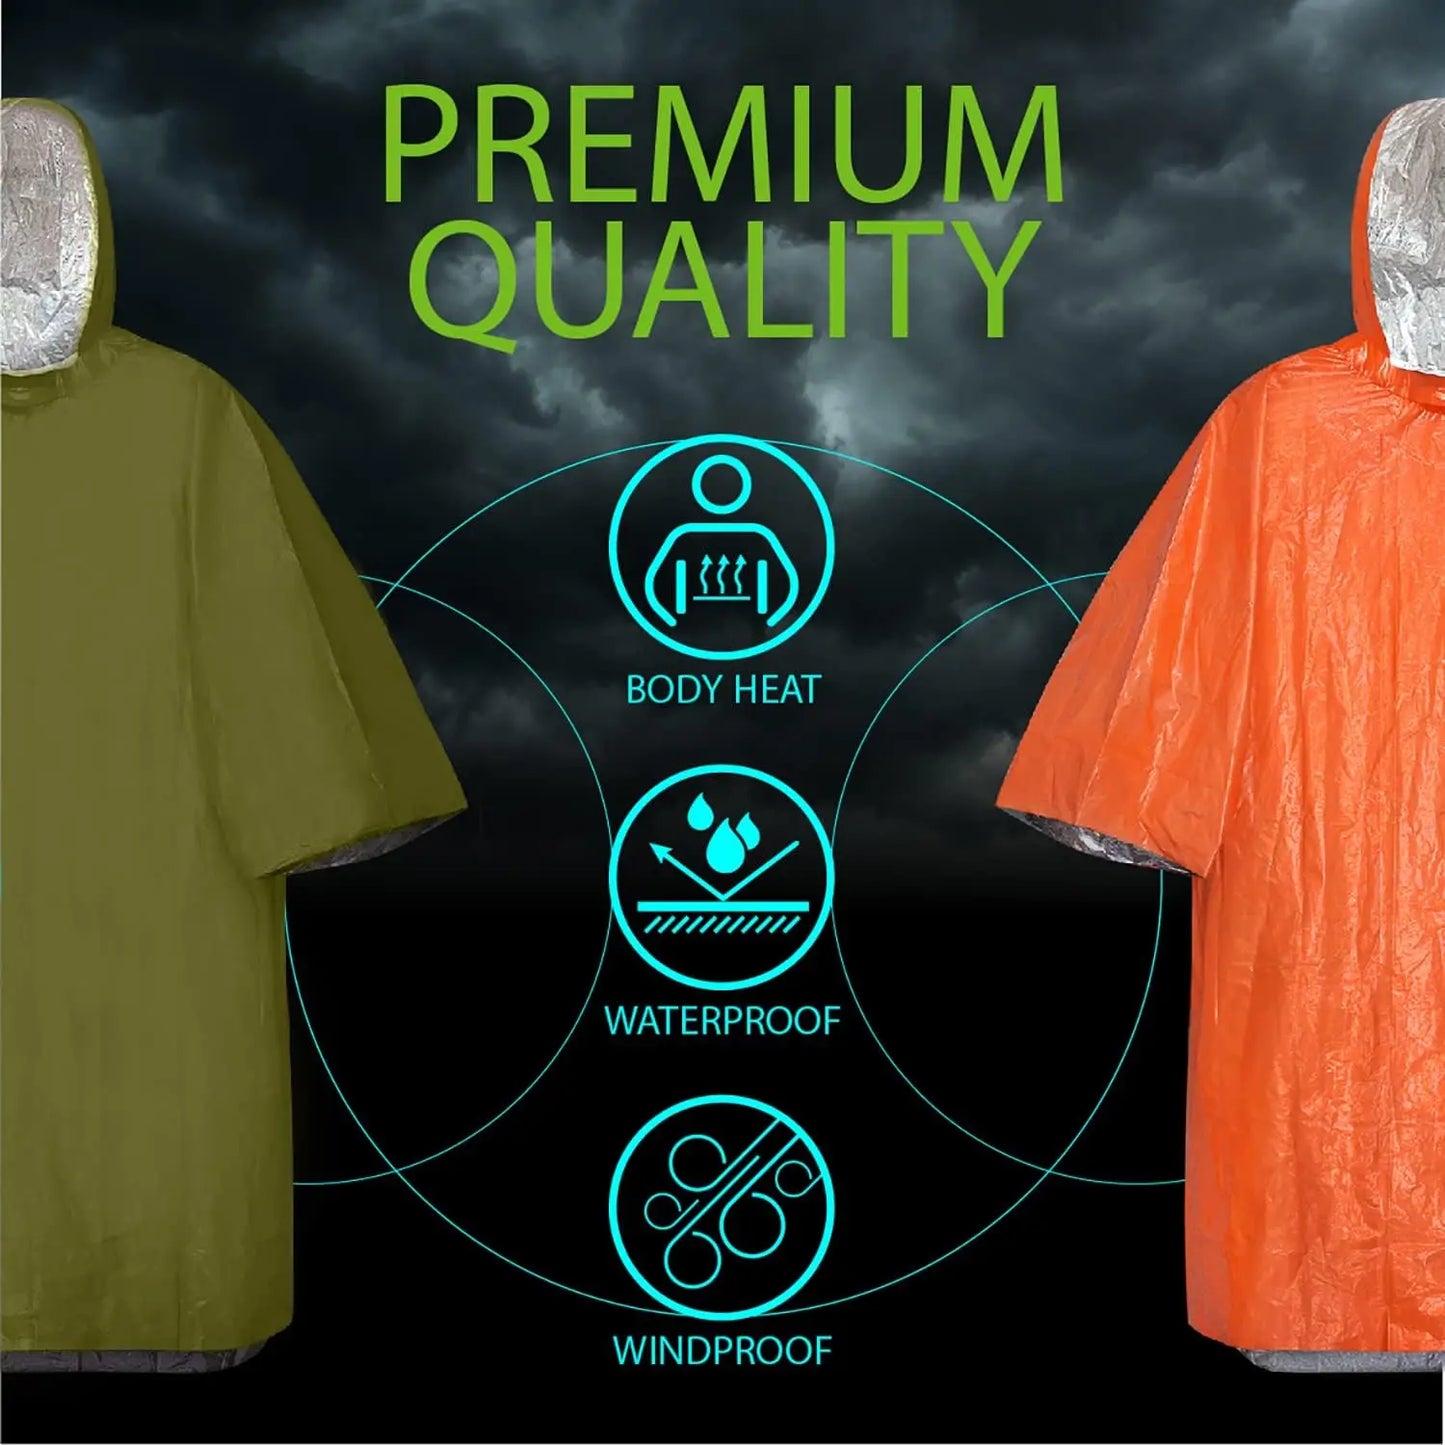 Emergency Rain Poncho With Hood Reusable Weather Resistant Raincoat For Men Women Camping Hiking Emergency Supplies Survival Kit